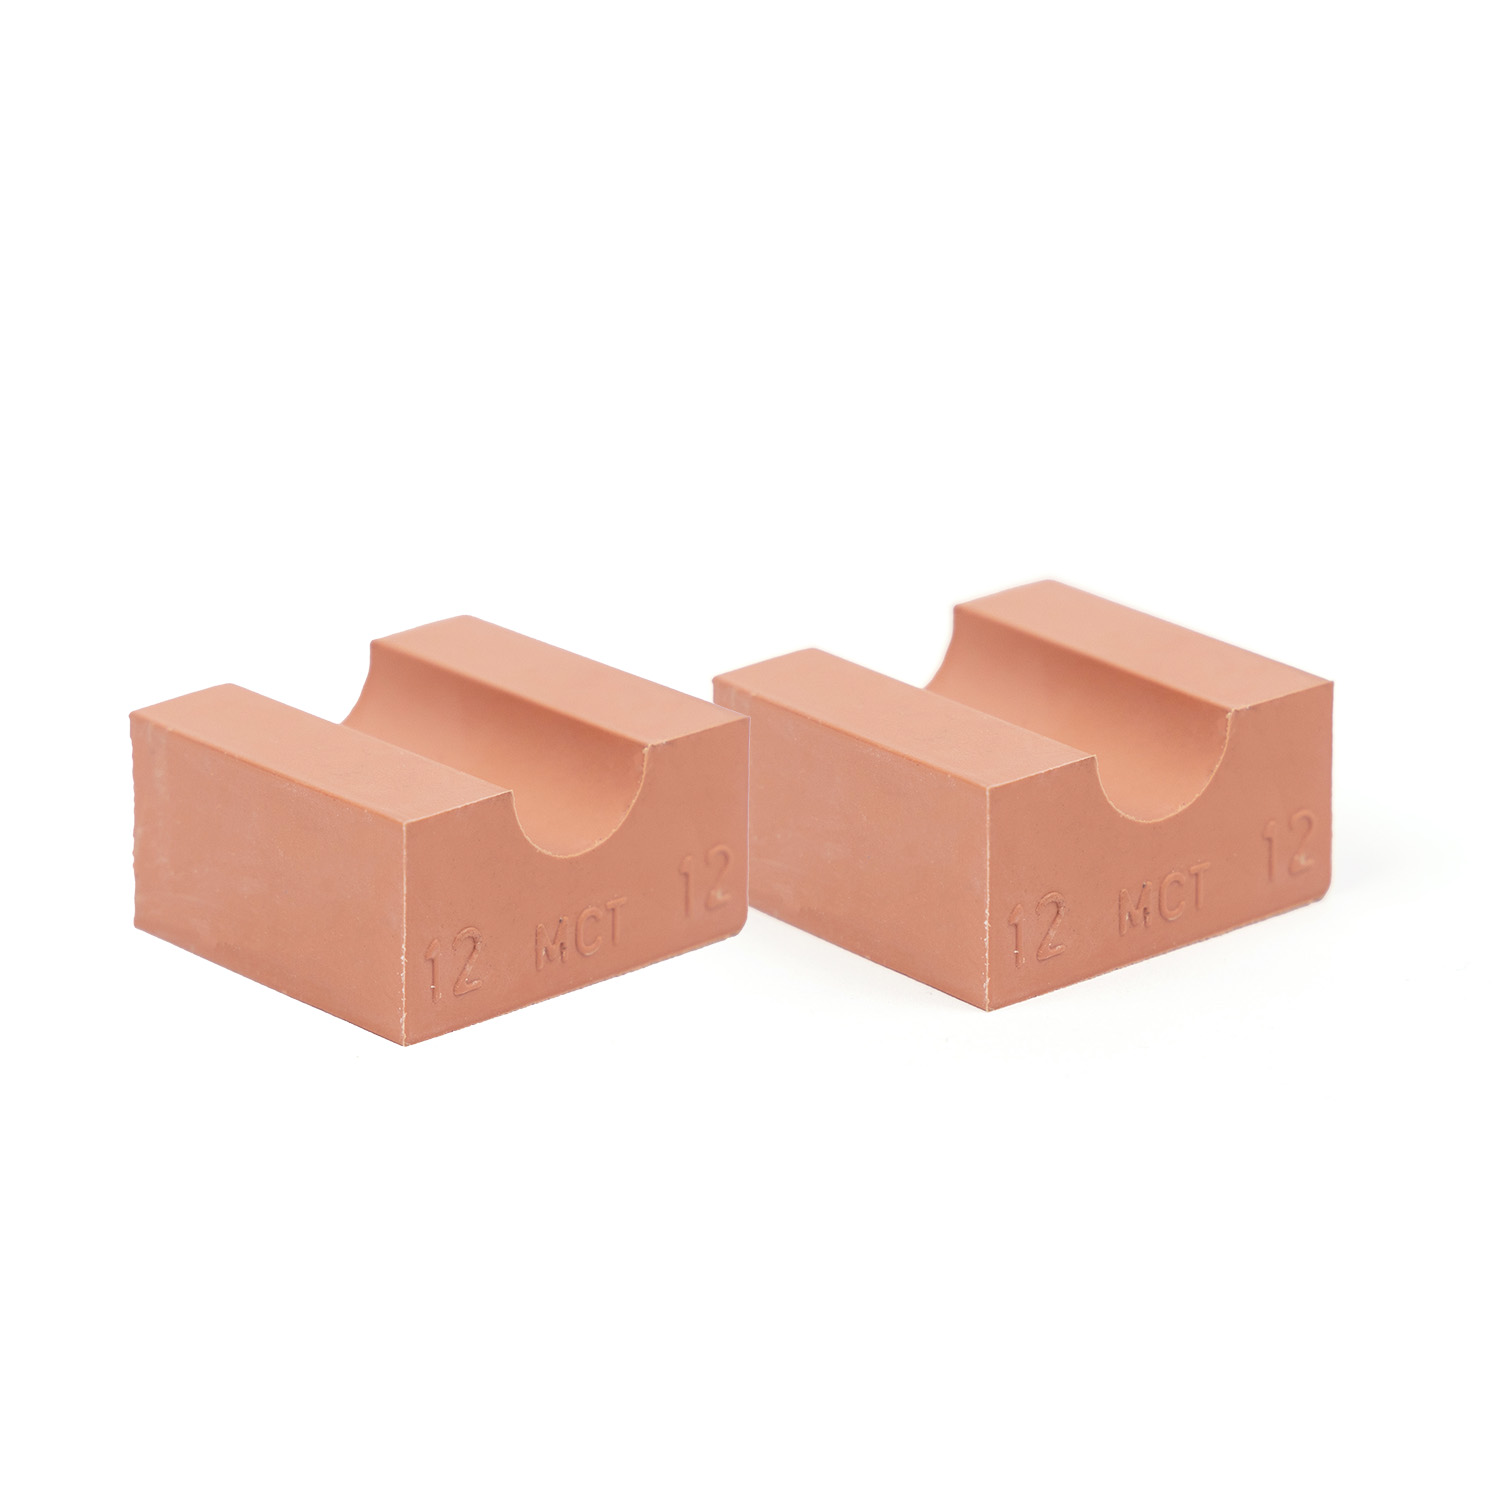 20-06 30MM*2 Set of 2 half insert block lycron 30mm, 20-06 for cable/pipe diam. 5.5-6.5mm